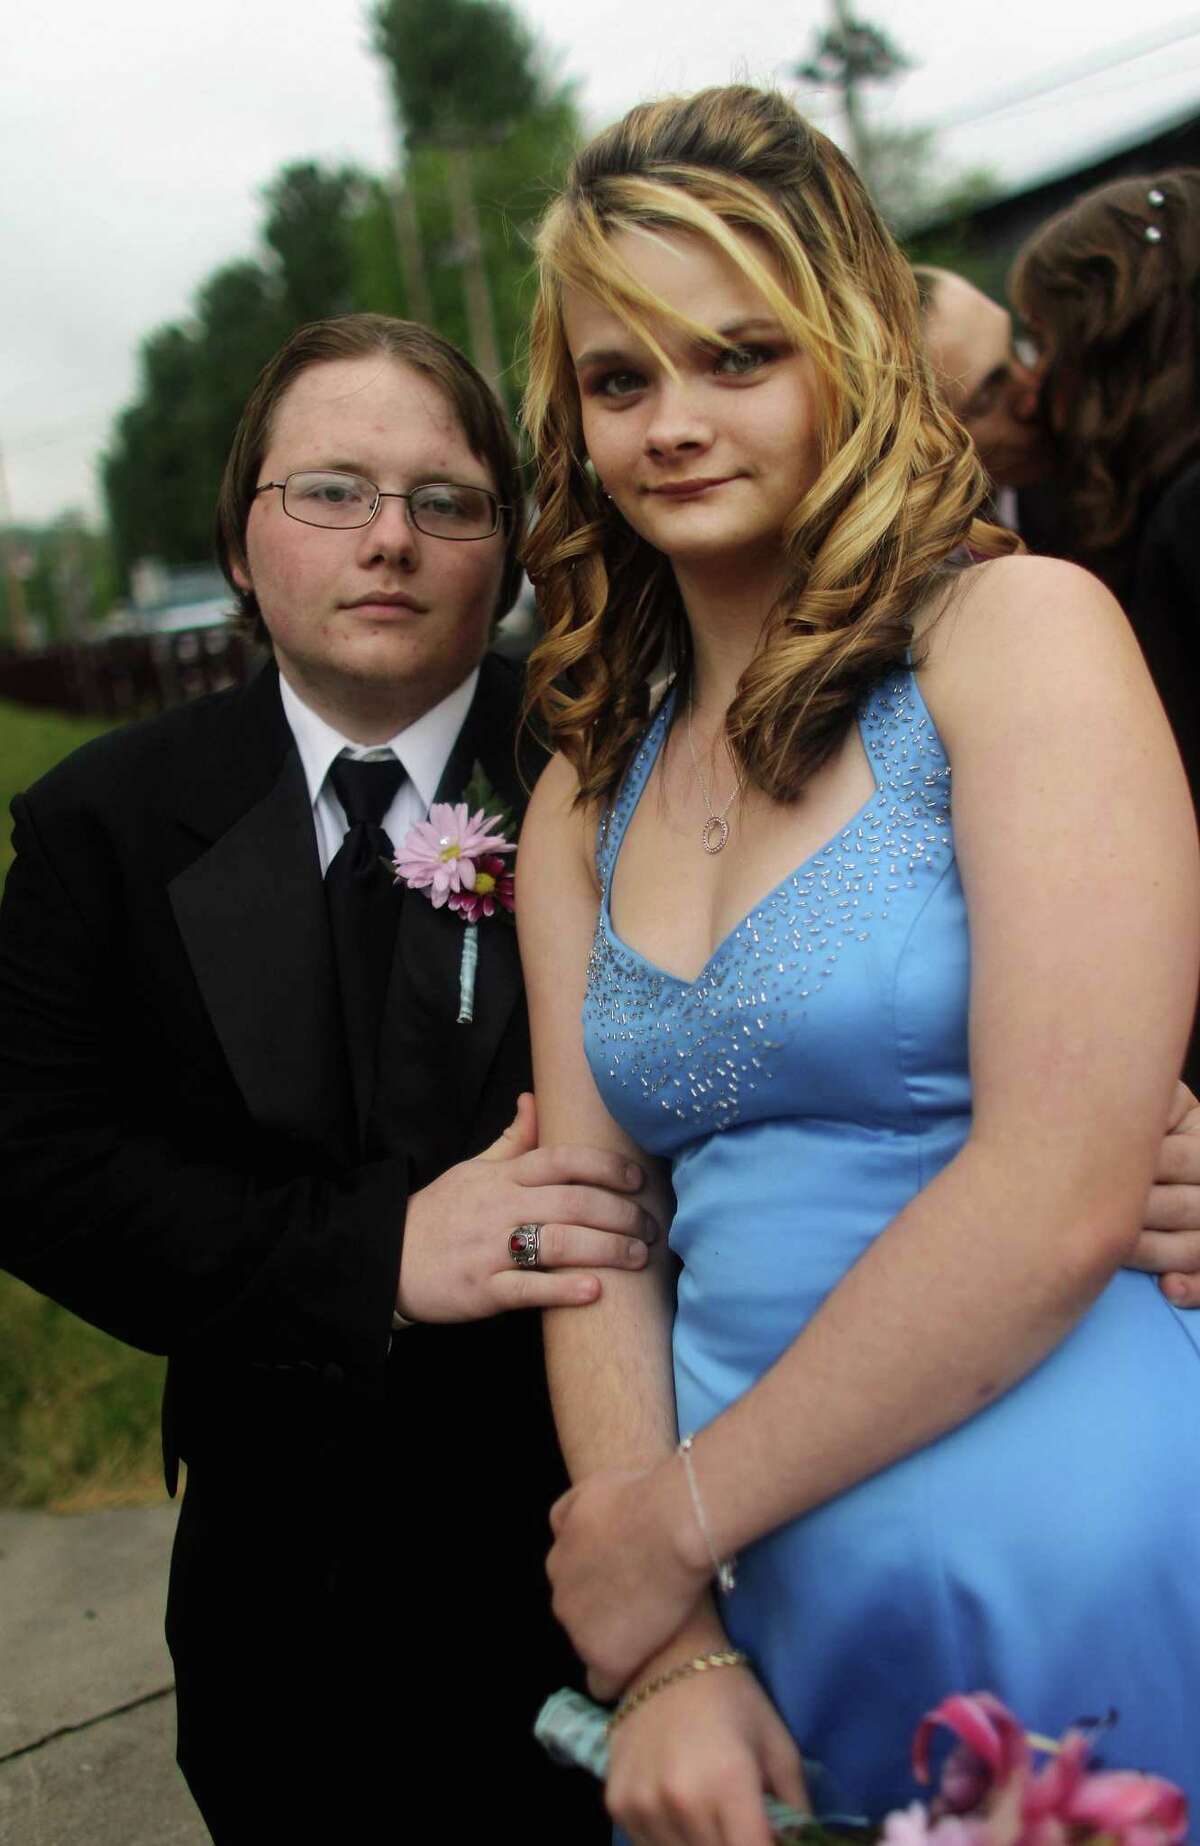 BOONEVILLE, KY - APRIL 21: Courtney Dean and Josh Sebastian pose outside the Owsley County High School prom on April 21, 2012 in Booneville, Kentucky. Daniel Boone once camped in the Appalachian mountain hamlet of Owsley County which remains mostly populated by descendants of settlers to this day. The 2010 U.S. Census listed Owsley County as having the lowest median household income in the country outside of Puerto Rico, with 41.5% of residents living below the poverty line. Familial and community bonds run deep, with a populace that shares a collective historical and cultural legacy uncommon in most parts of the country. However, the community of around 5,000 struggles with a lack of jobs due to the decline in coal, tobacco and lumber industries along with health issues including drug addiction without effective treatment. (Photo by Mario Tama/Getty Images)